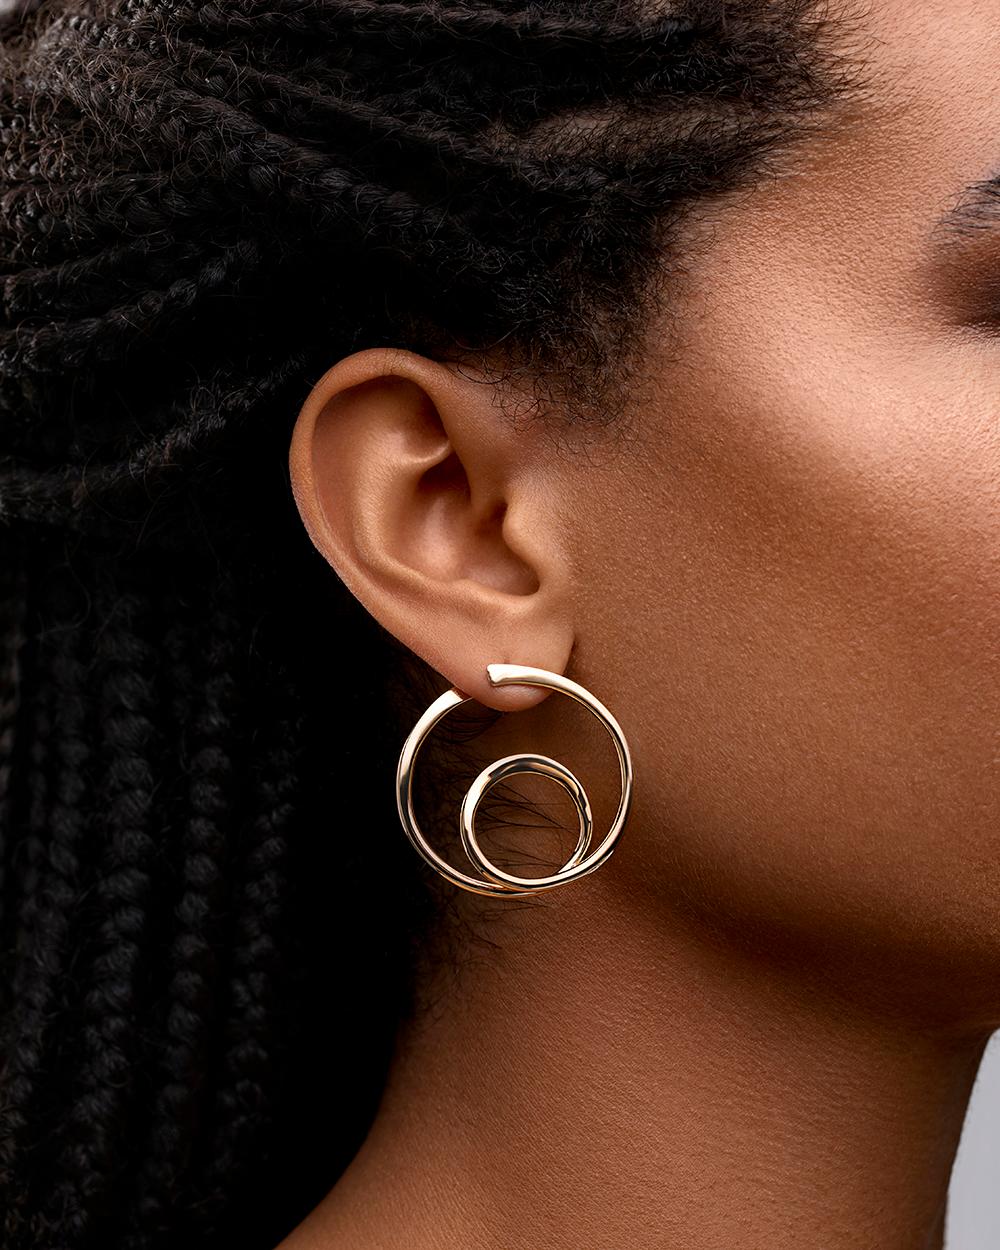 Designer: Art Smith

The Orbit hoops are a Legendary twist on the classic hoop, originally designed by Renowned Jeweler Art Smith, in Greenwich Village.

Handcrafted in NYC with 18kt certified Fairmined Ecological gold that is toxic chemical free,